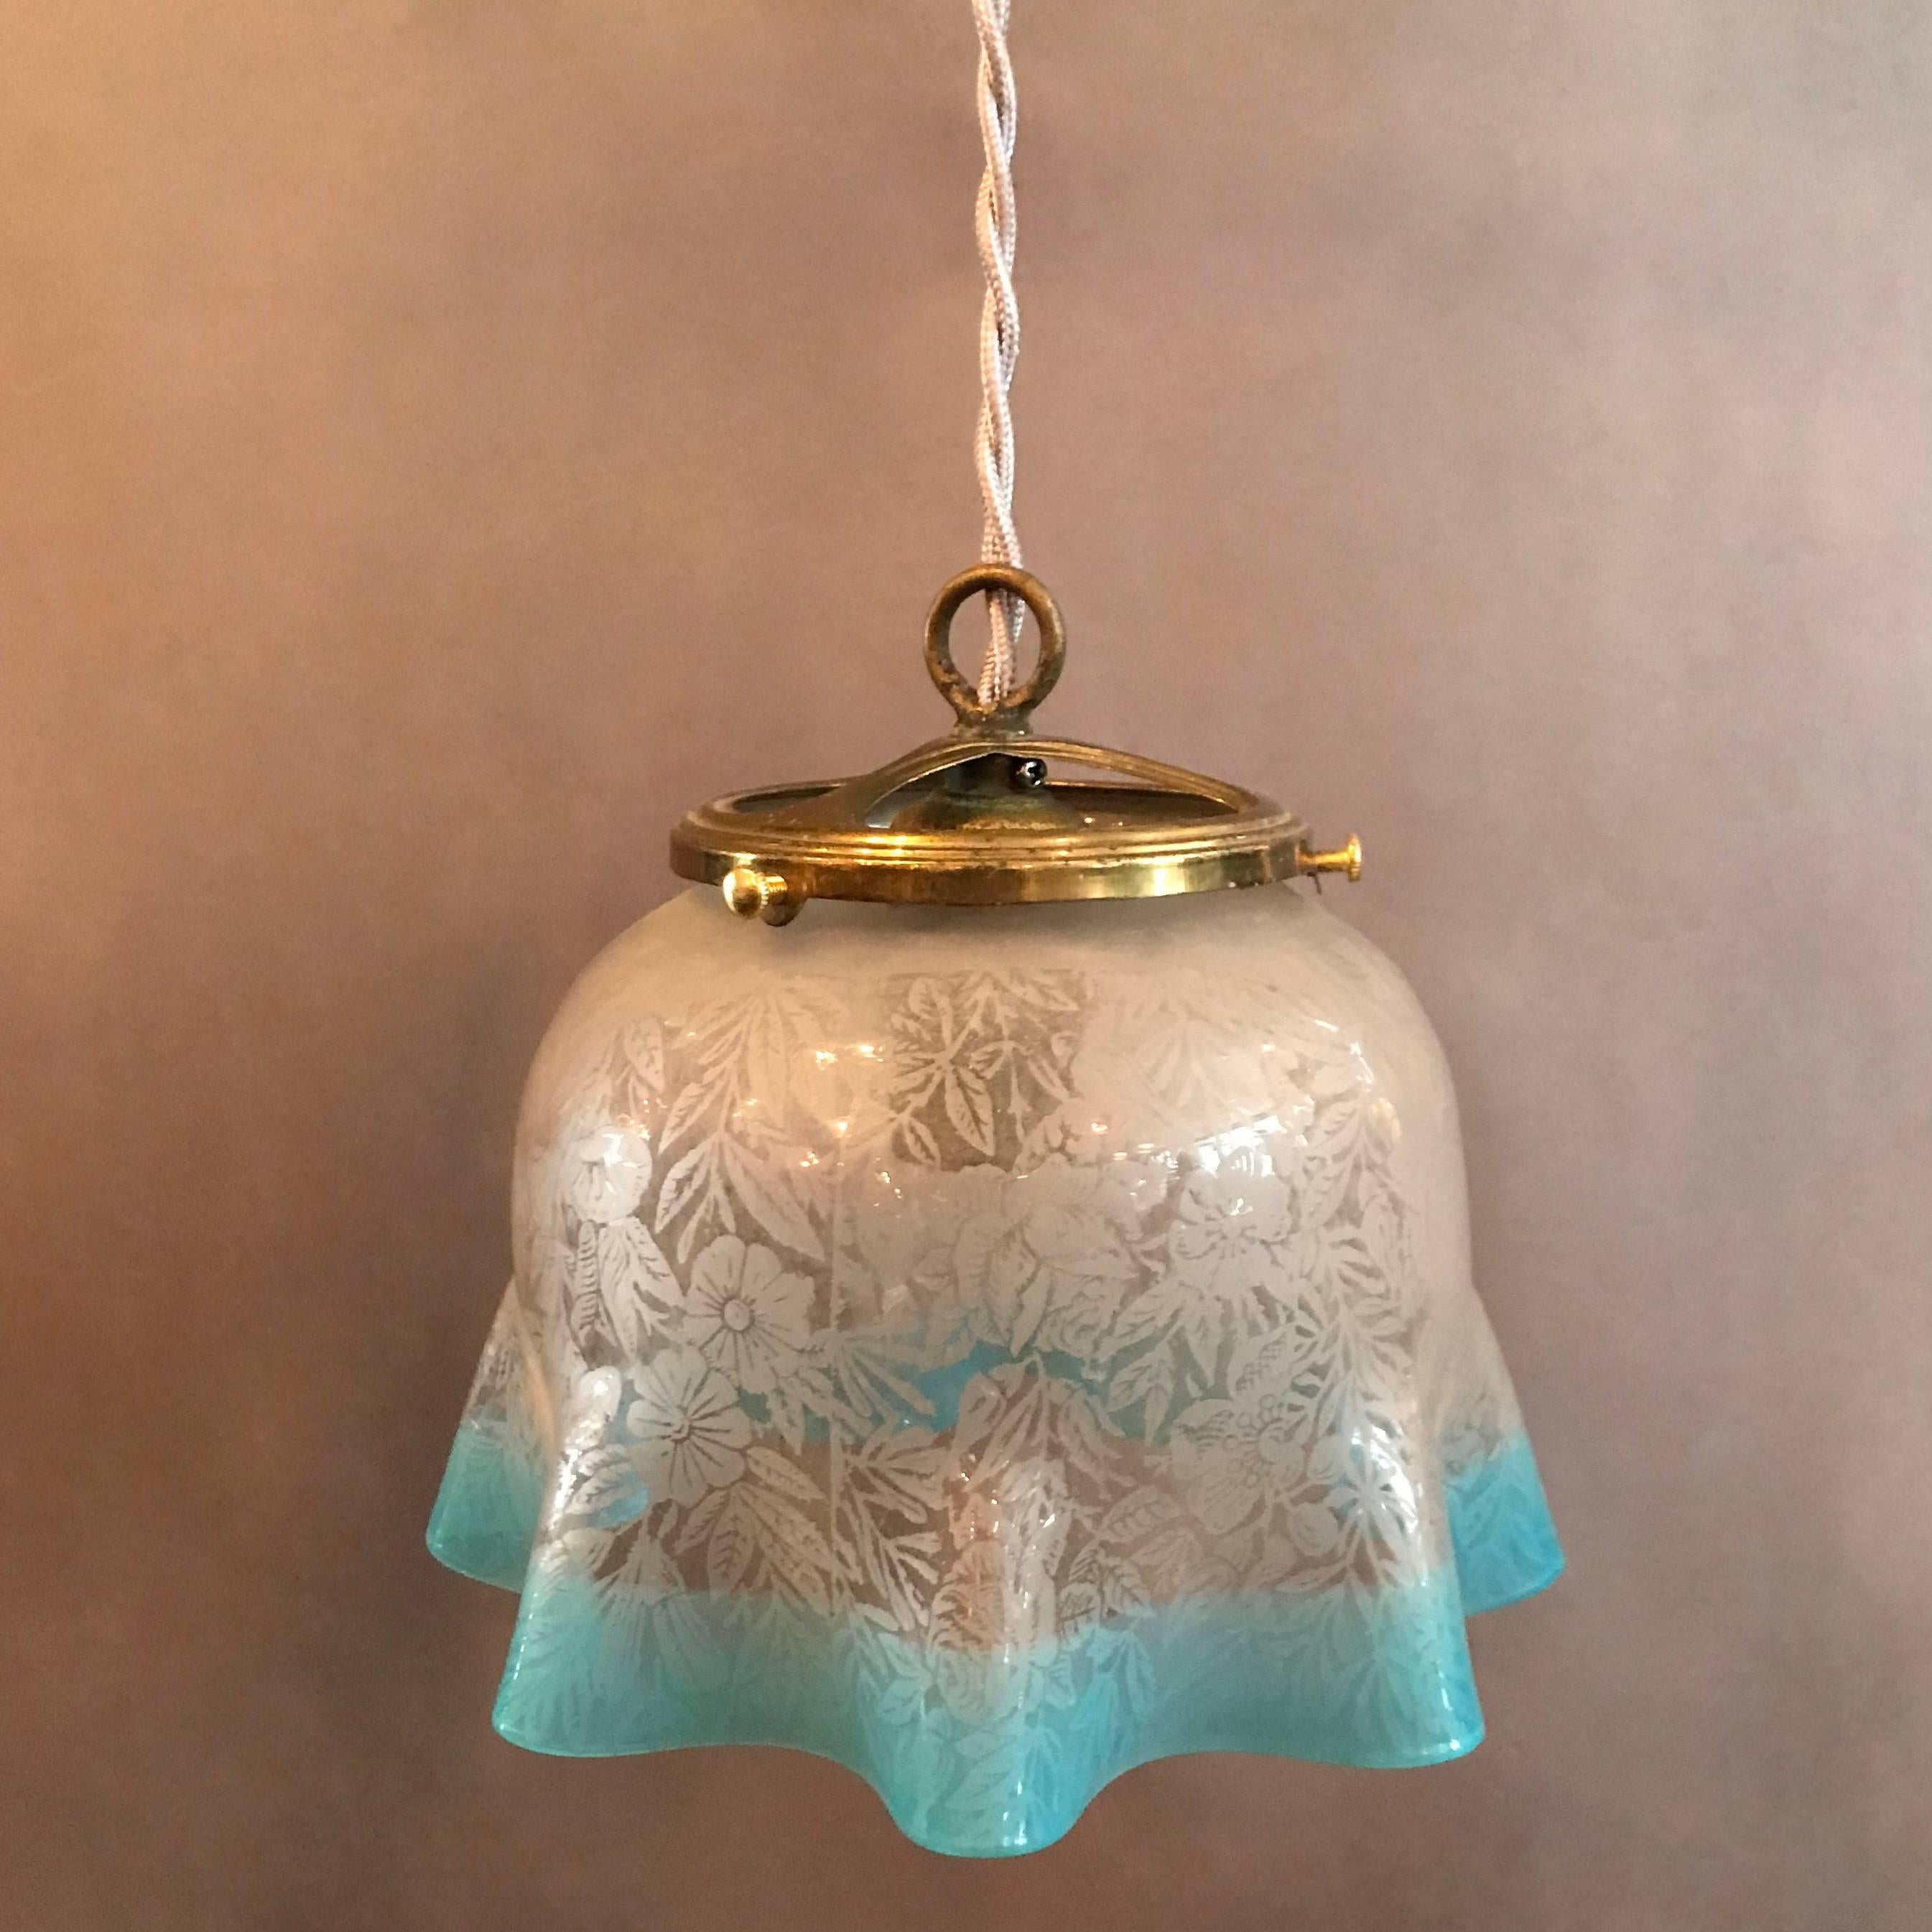 Antique, late 19th century, pendant features a ruffled, intricately etched, foliate pattern glass shade with light blue trim and open brass fitter. This light is newly wired for up to a 100 watt bulb with 48in. of braided cloth cord.